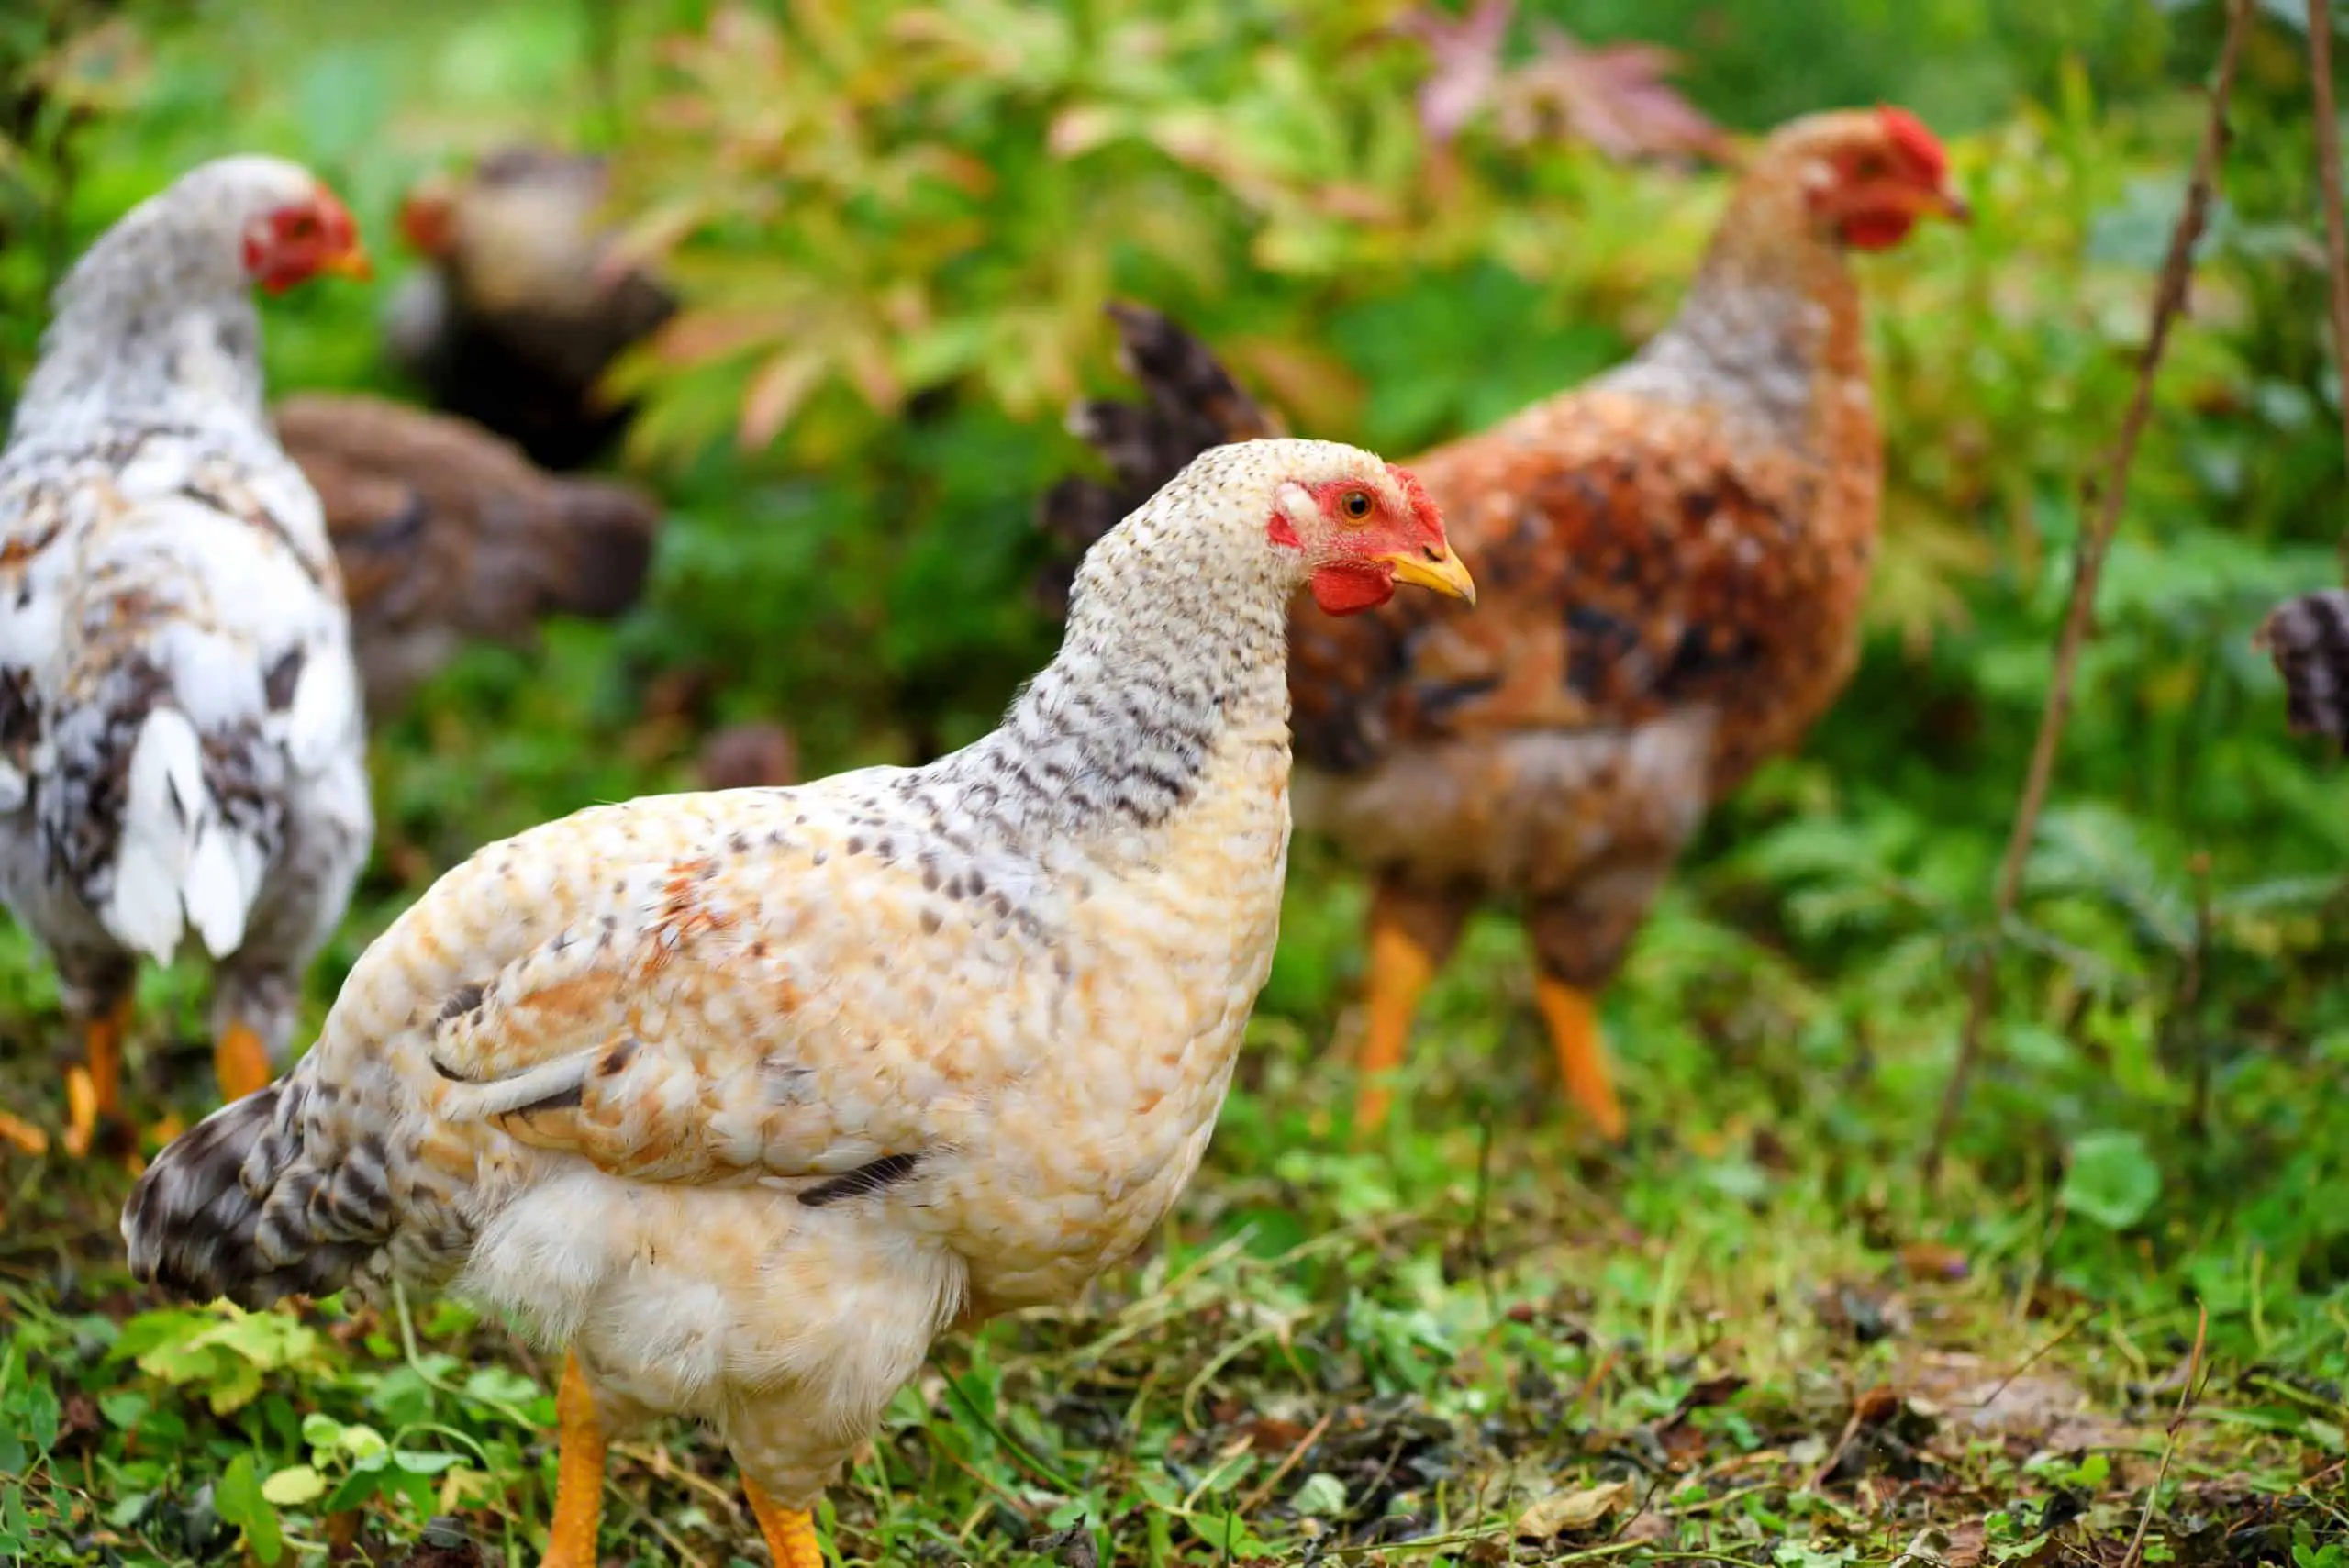 Hens in organic garden where it is essential to use a pet-friendly weed killer